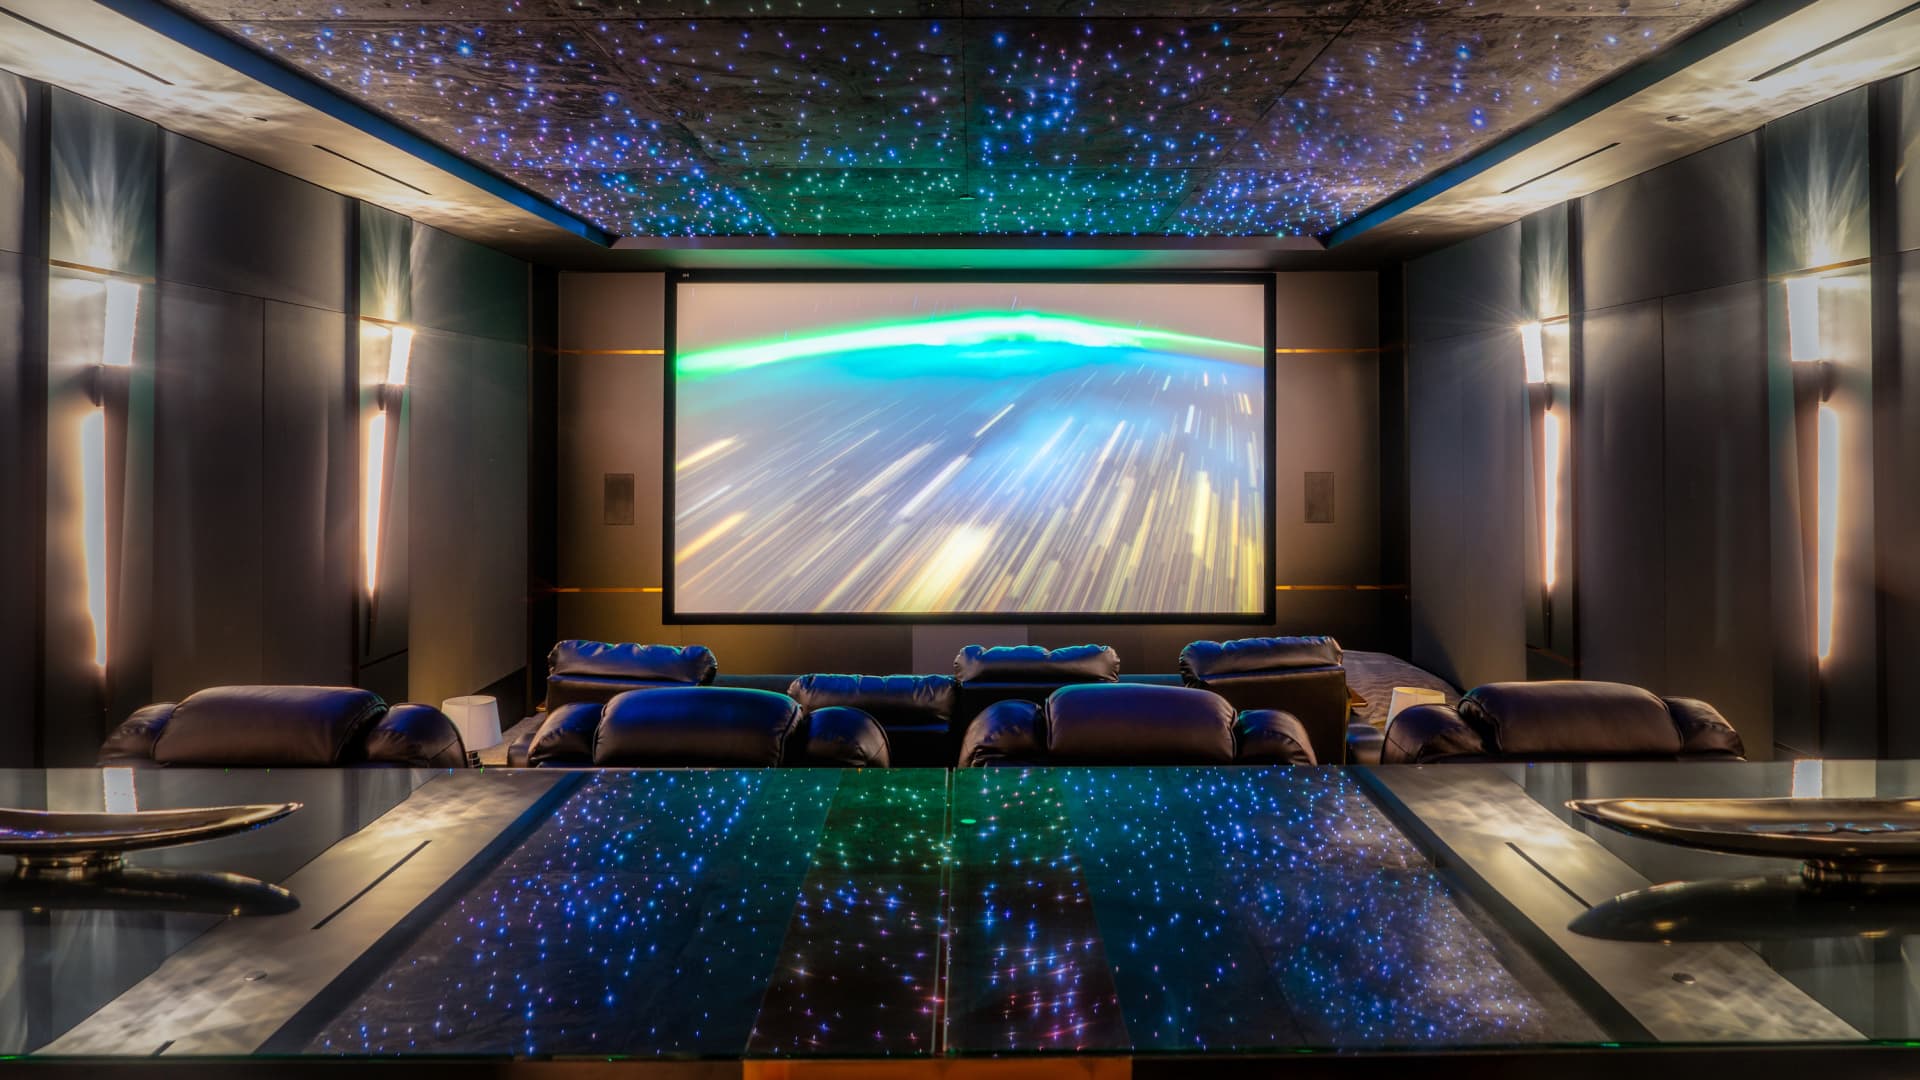 Home cinema with Rolls-Royce inspired star lit ceiling.